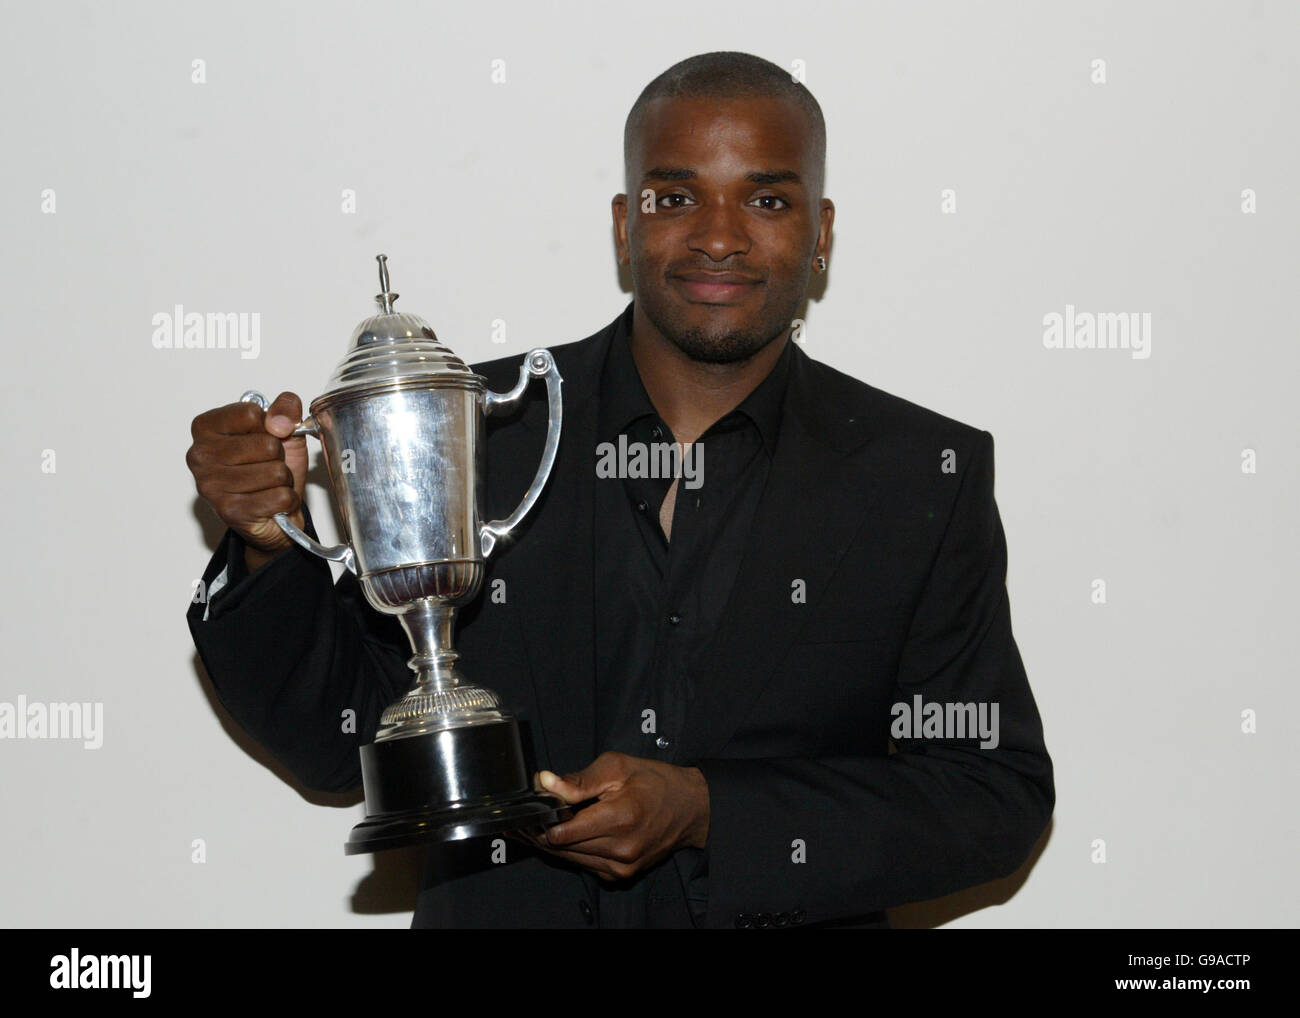 Soccer - Charlton Athletic Supporters Club Awards - North Stand Lounge at The Valley. Charlton Athletic Darren Bent Player of the year 2006 Stock Photo